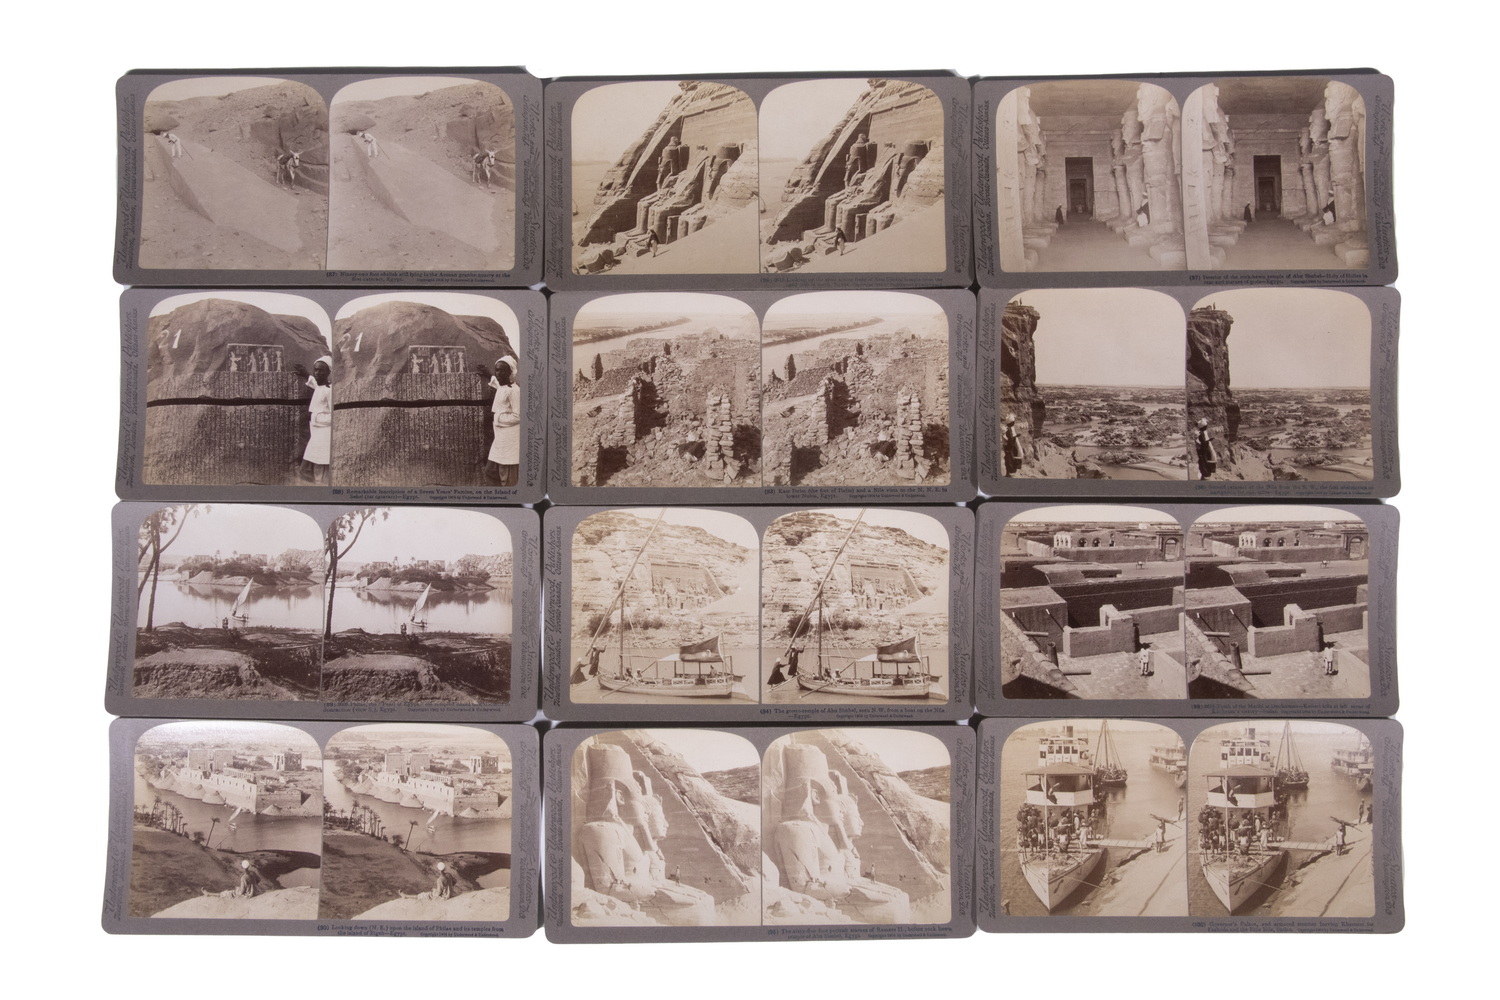  SET OF 100 CASED STEREOVIEW CARDS 30293b